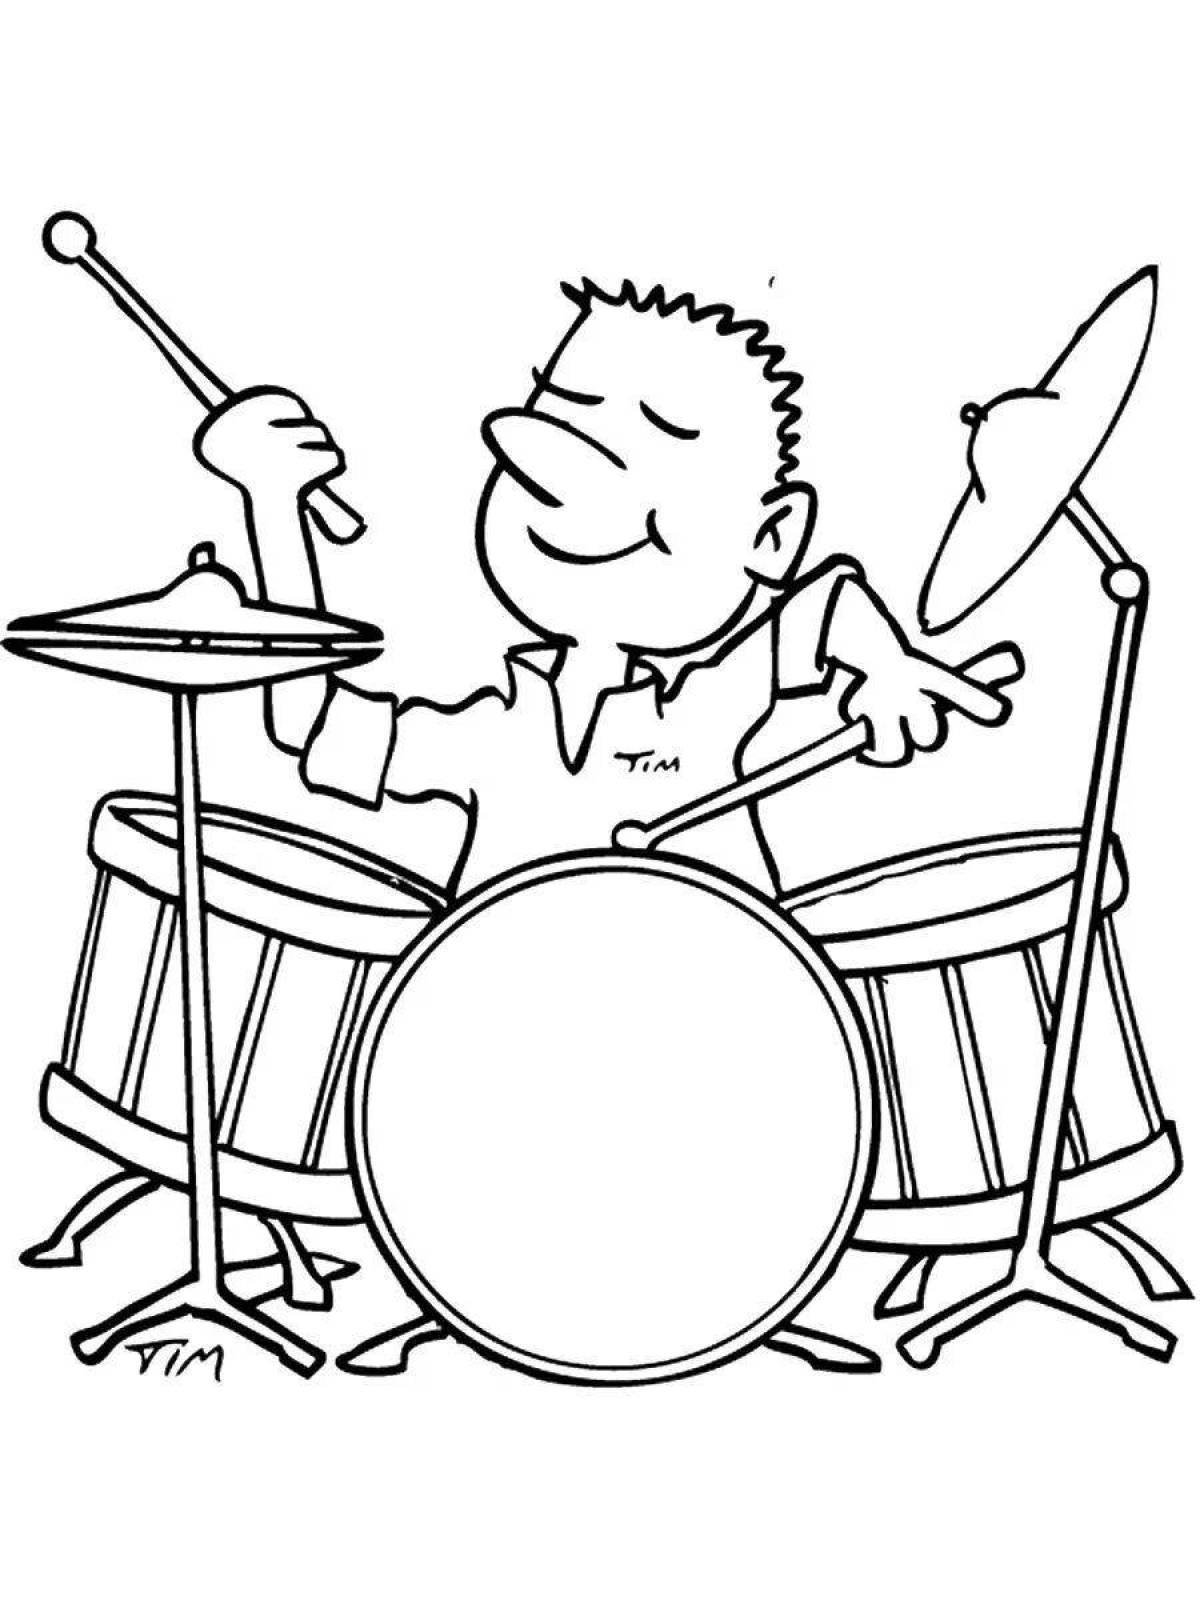 Coloring book magic orchestra for kids